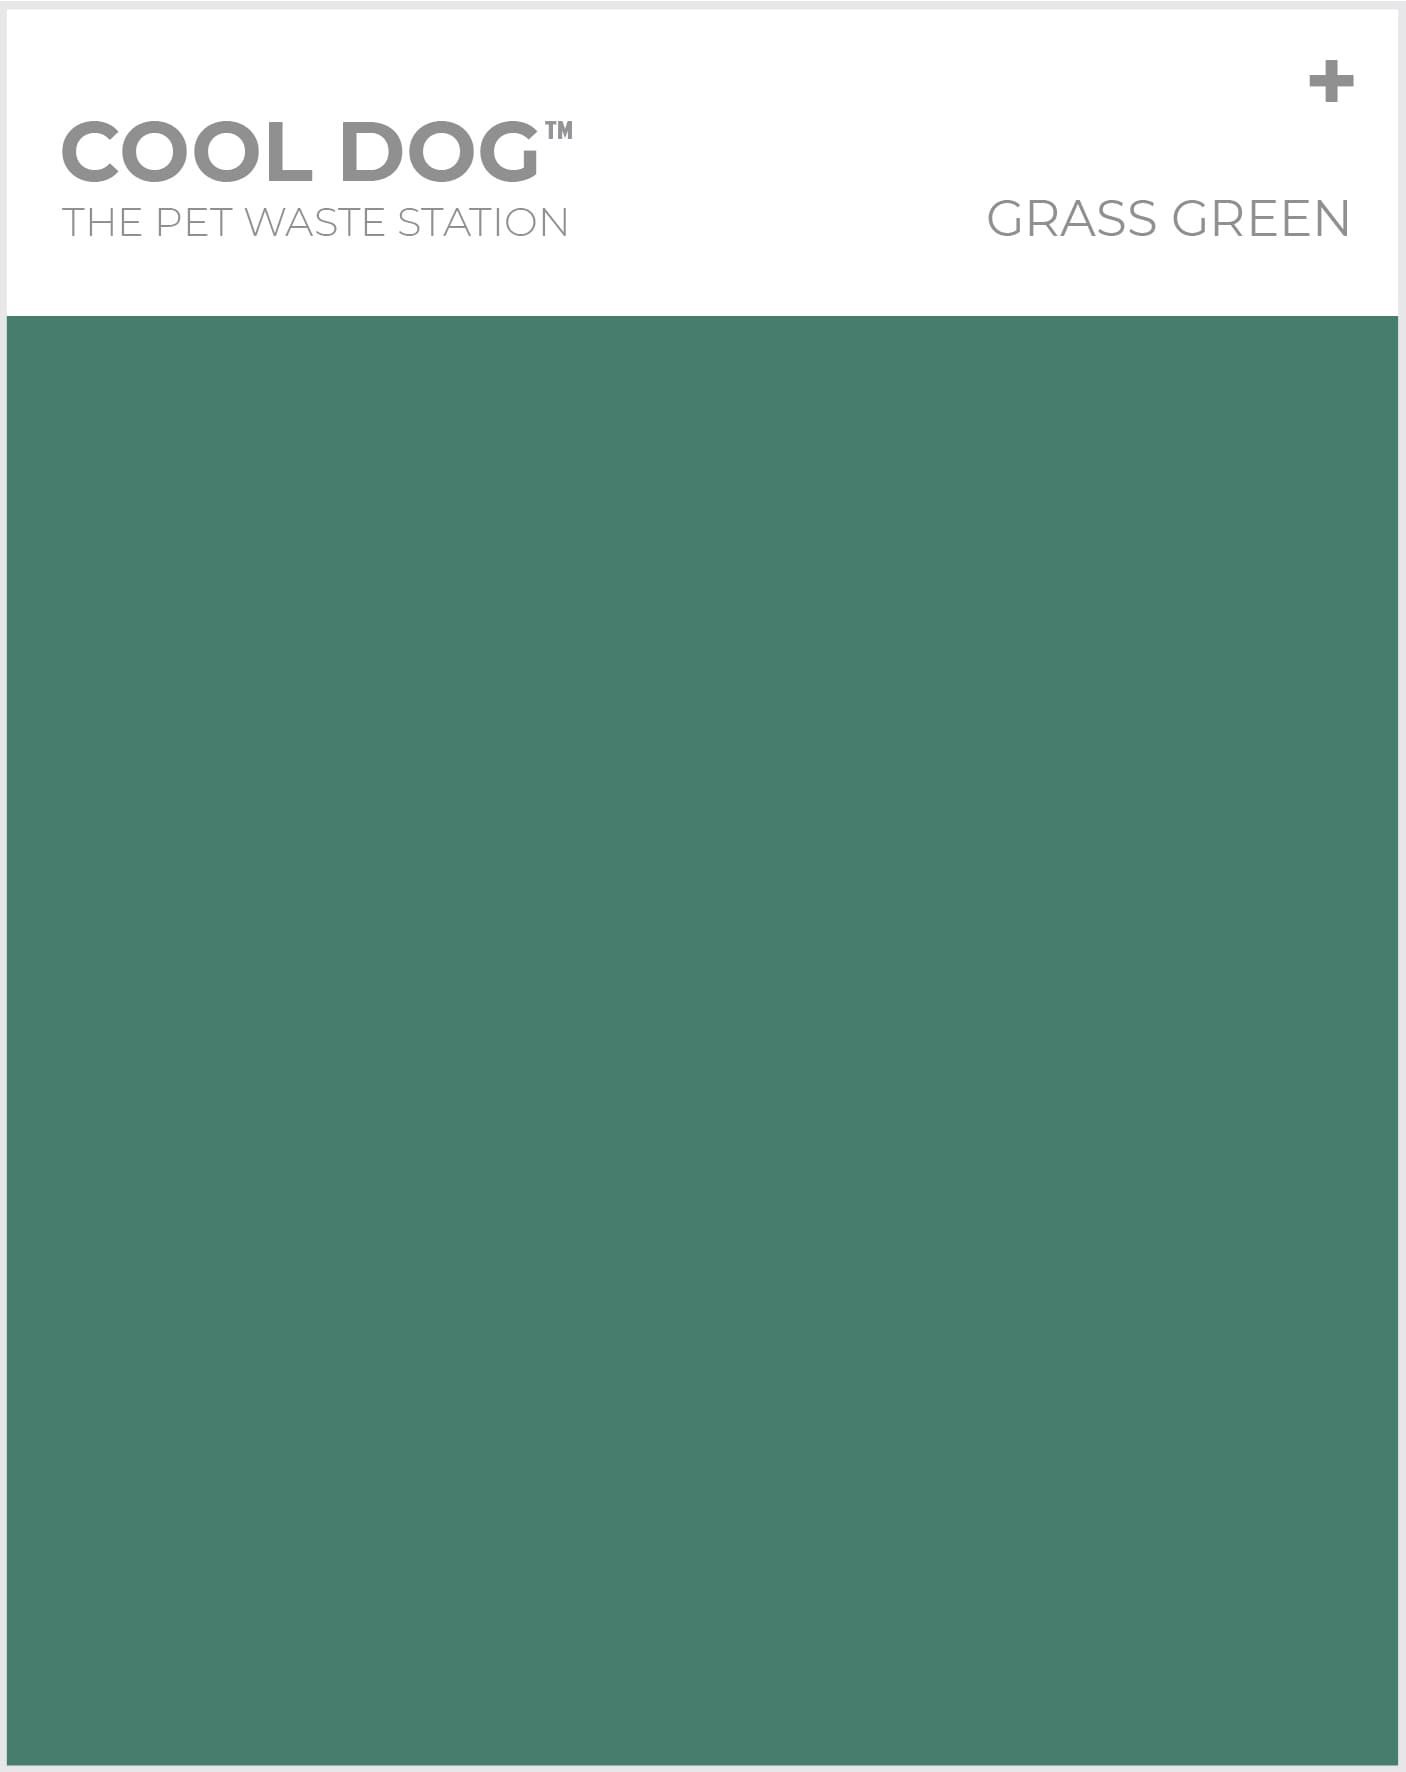 The Pet Waste Station - Grass Green